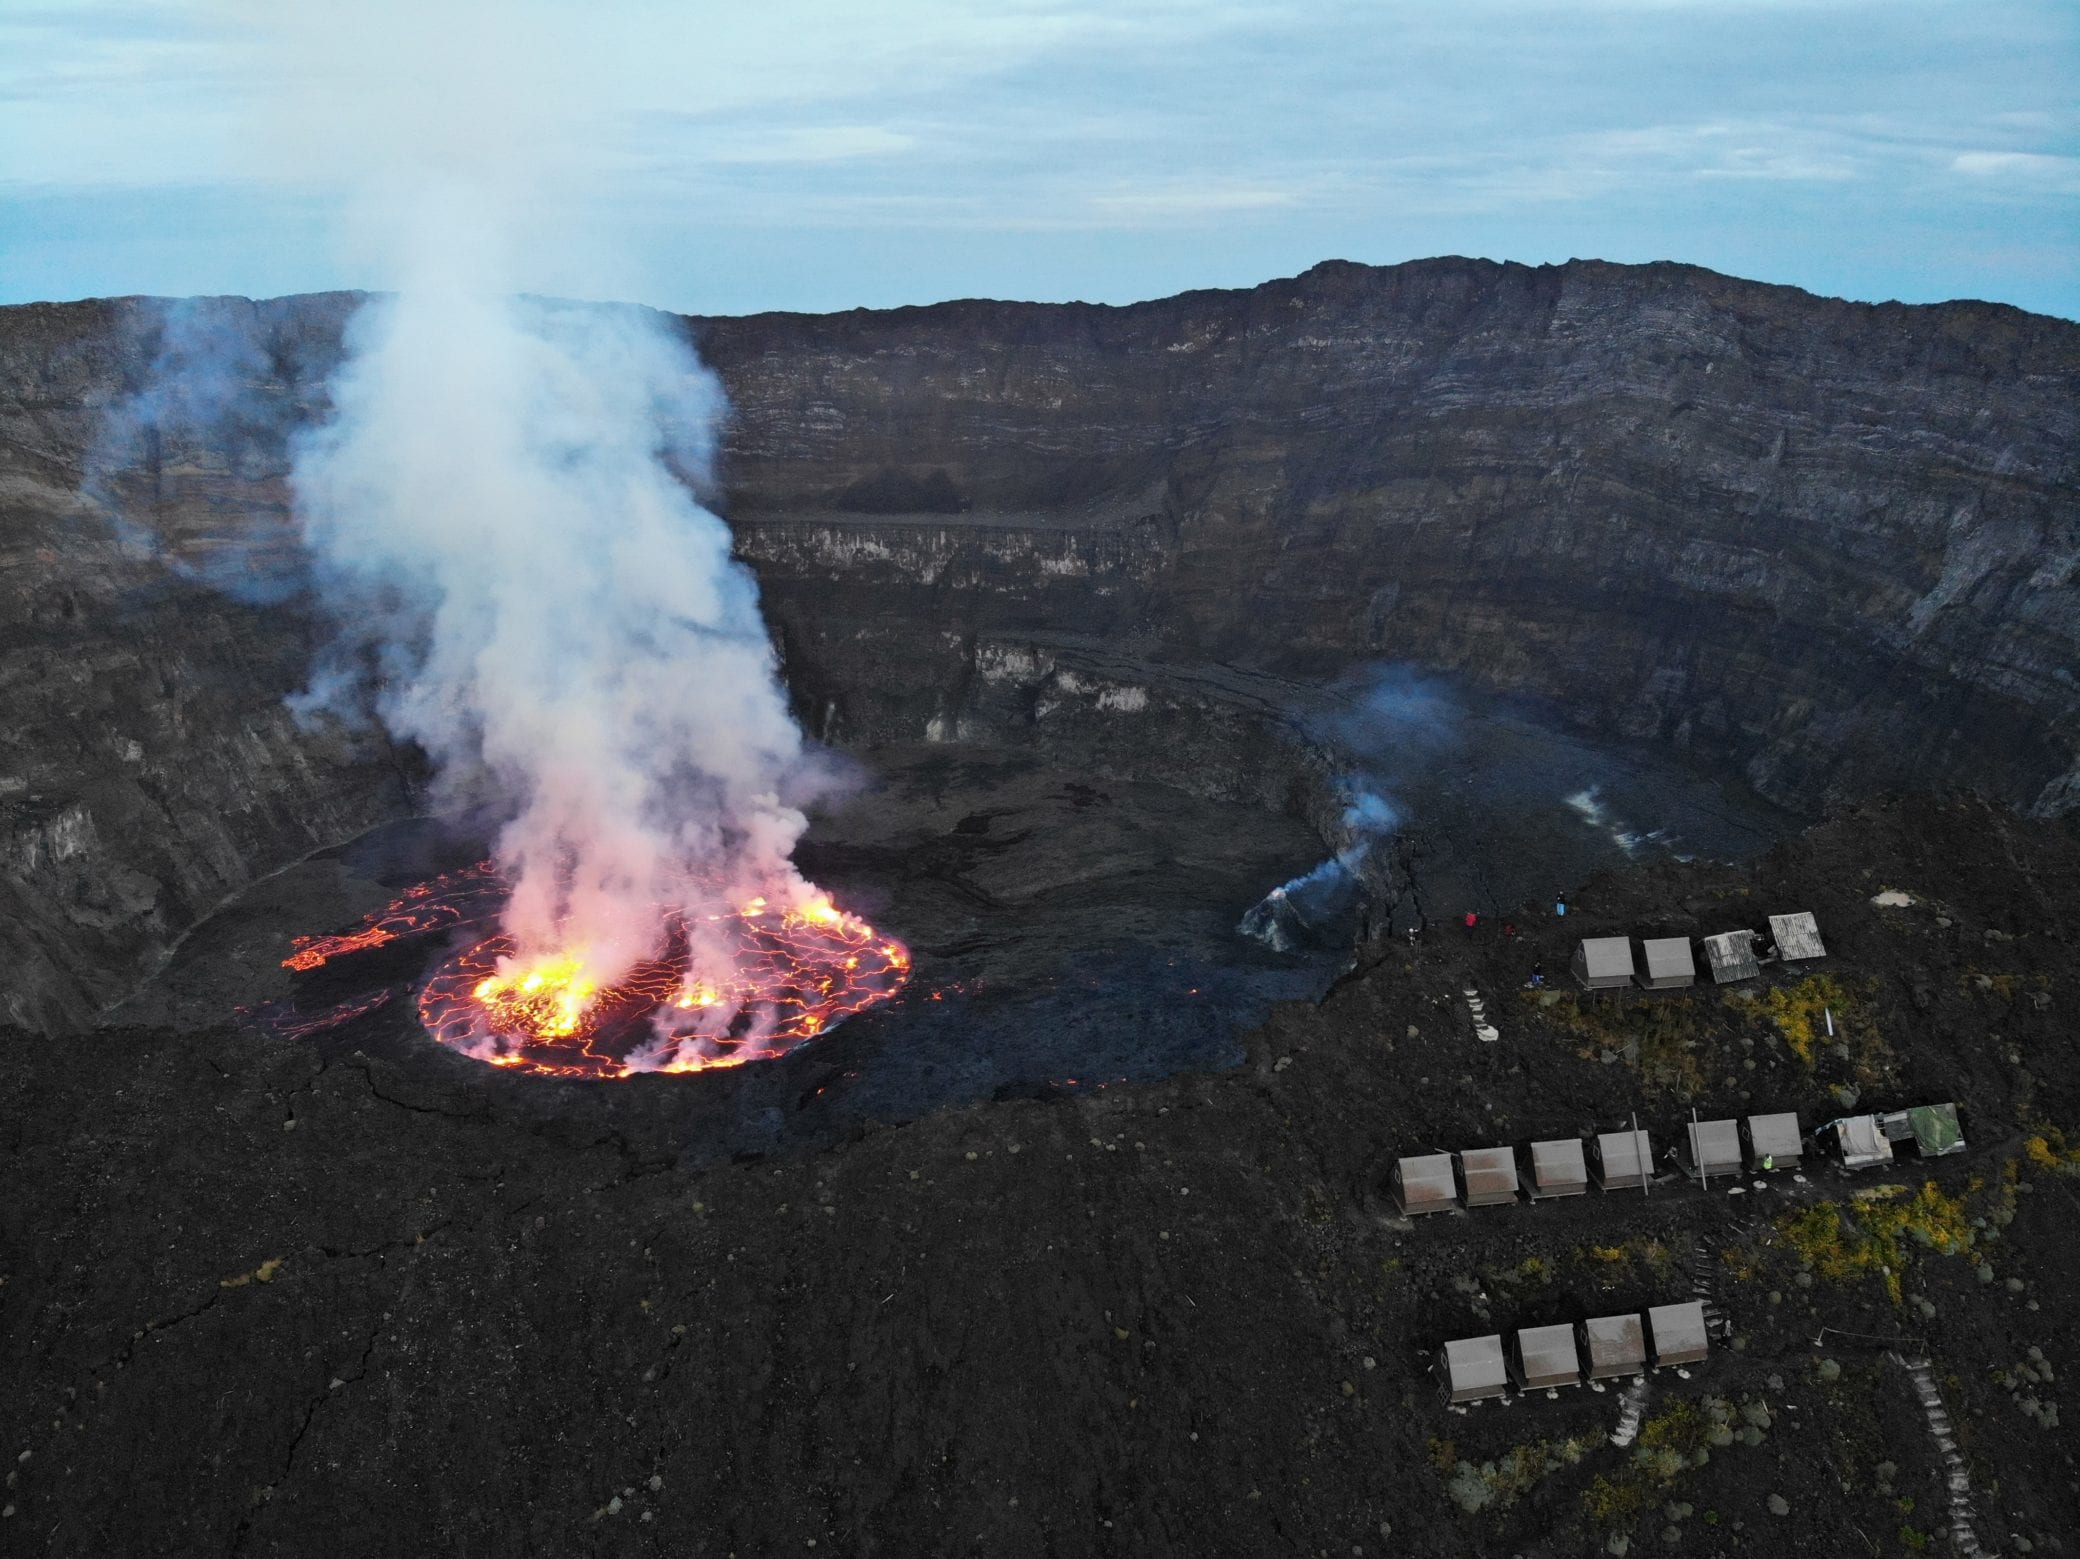 My Nyiragongo crater and lava lake showing the huts